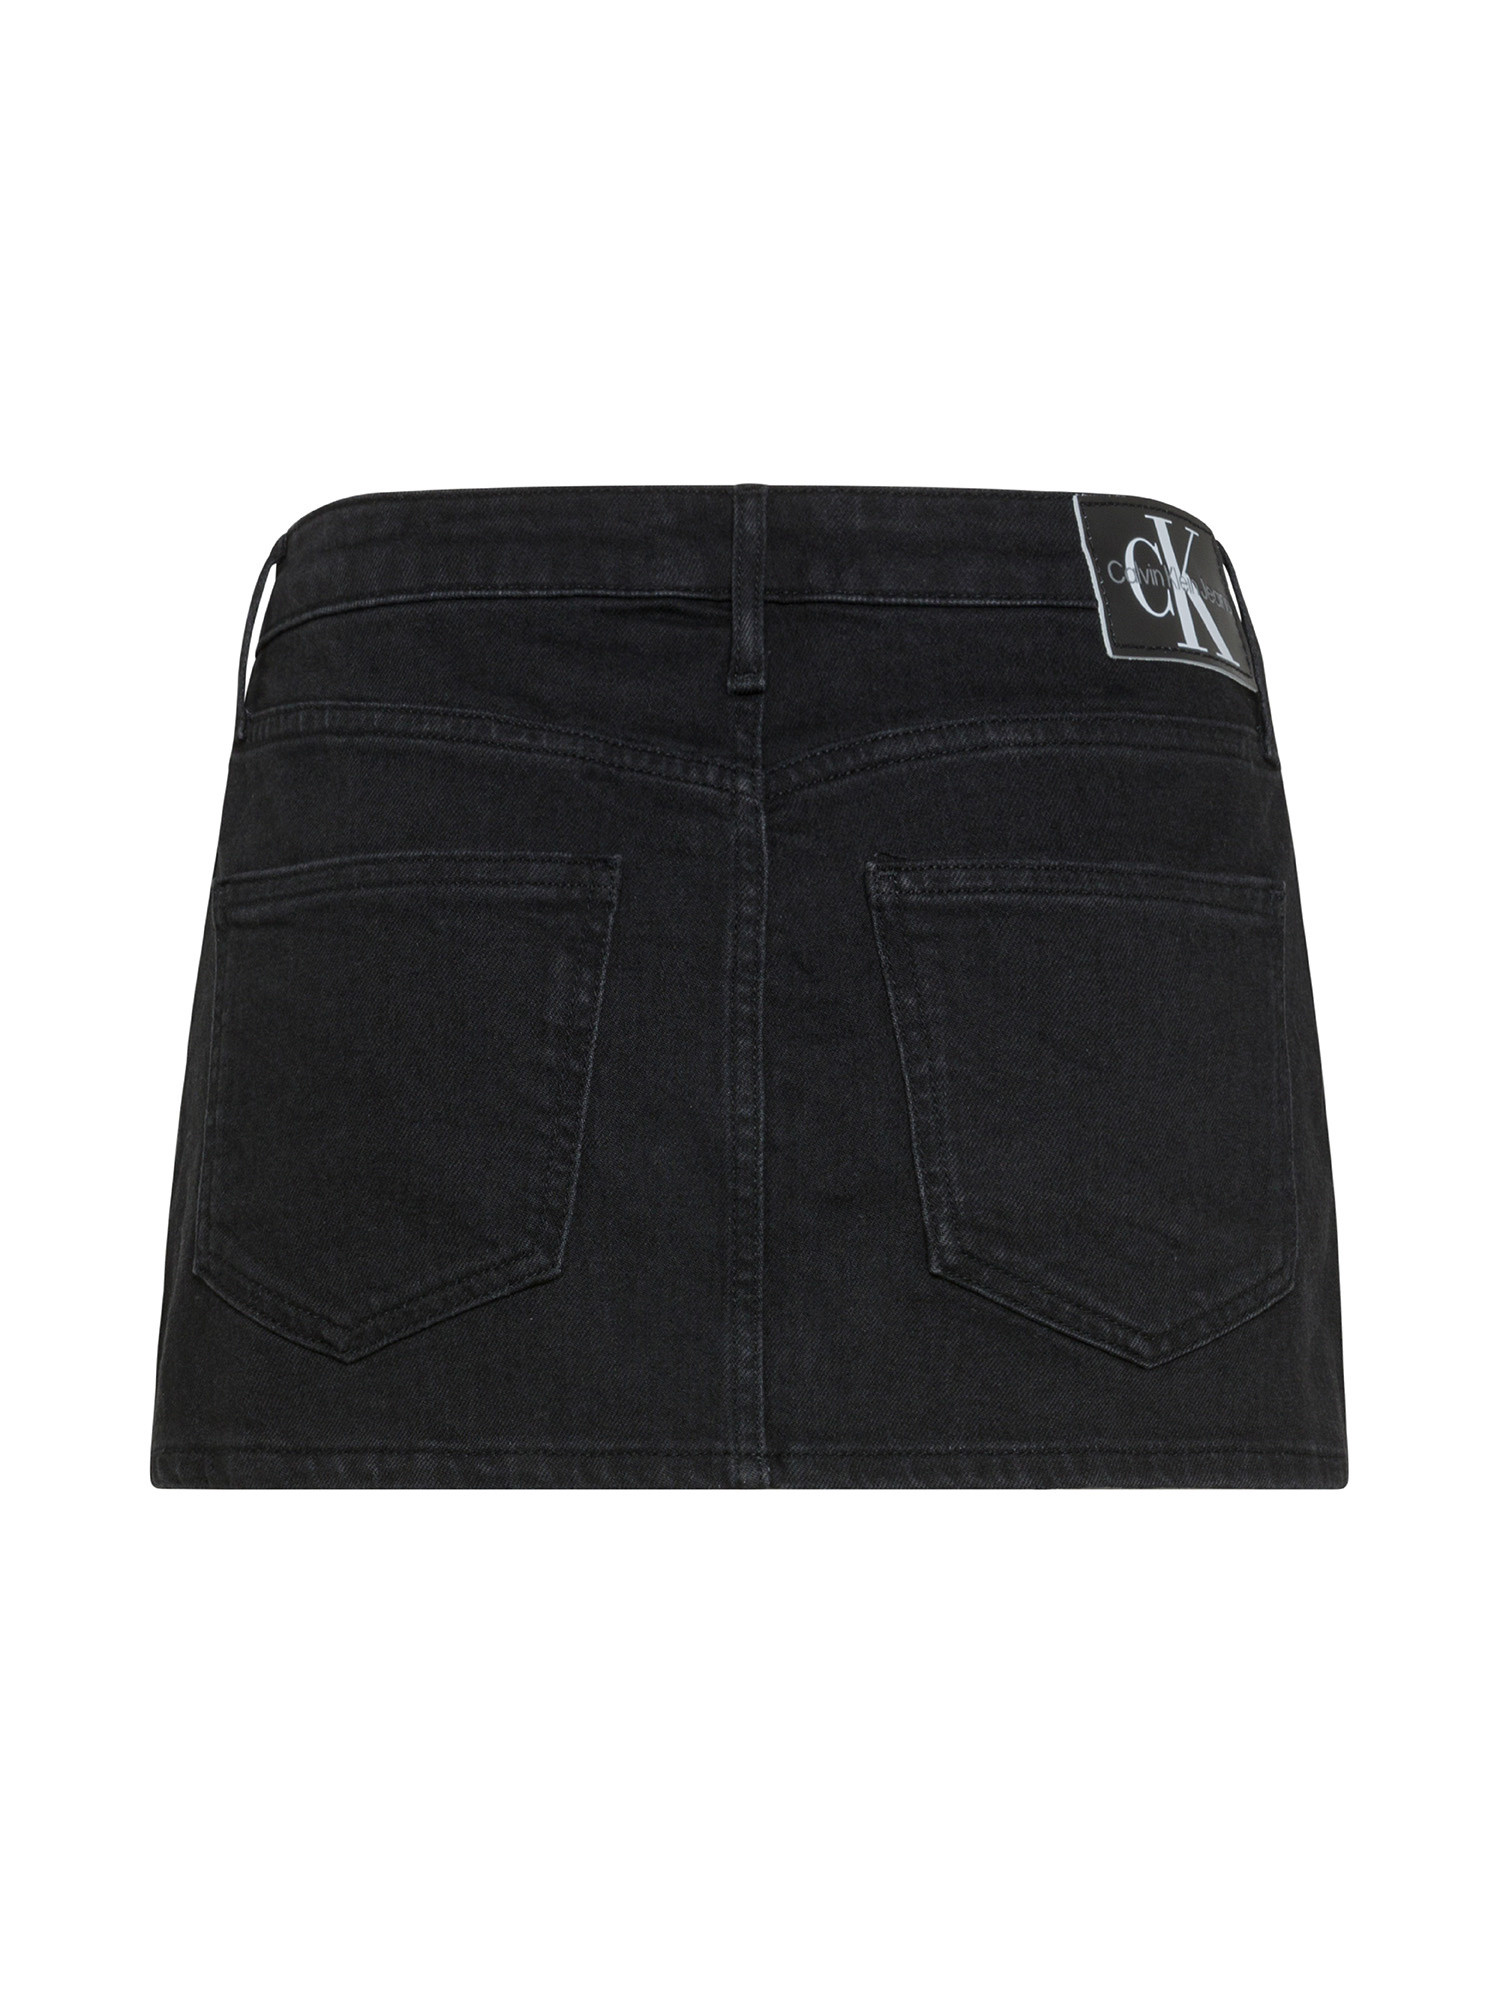 Calvin Klein Jeans - Mini gonna in jeans, Nero, large image number 1